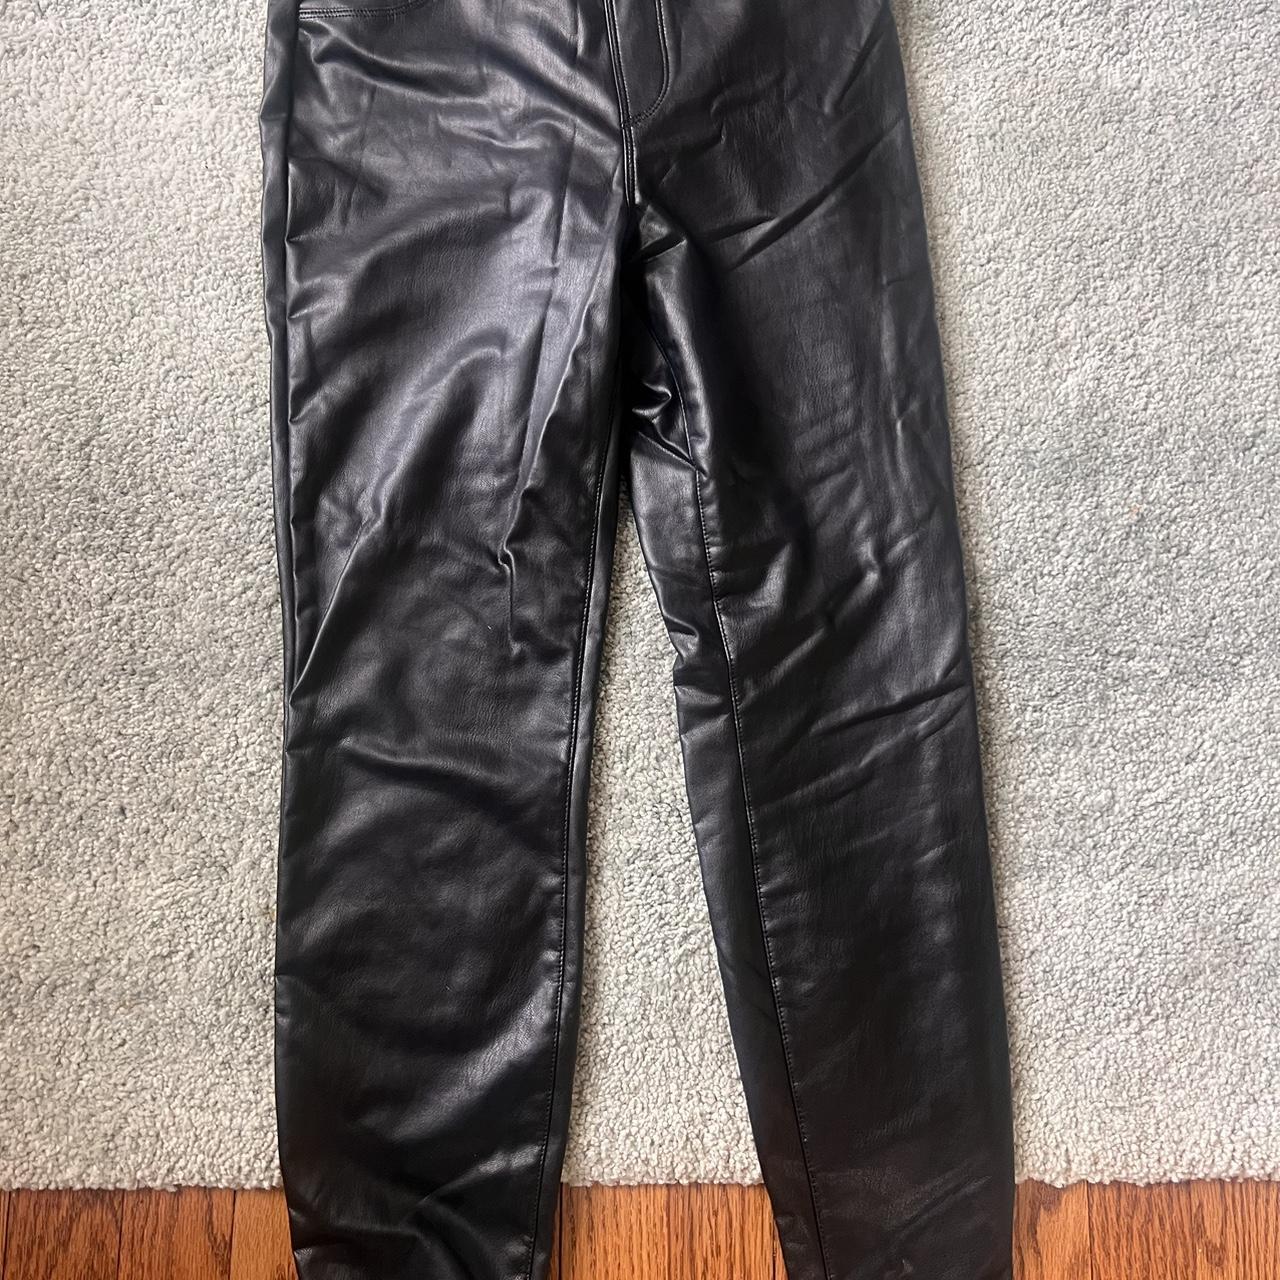 Target brand A New Day Faux Leather Leggings. Black - Depop